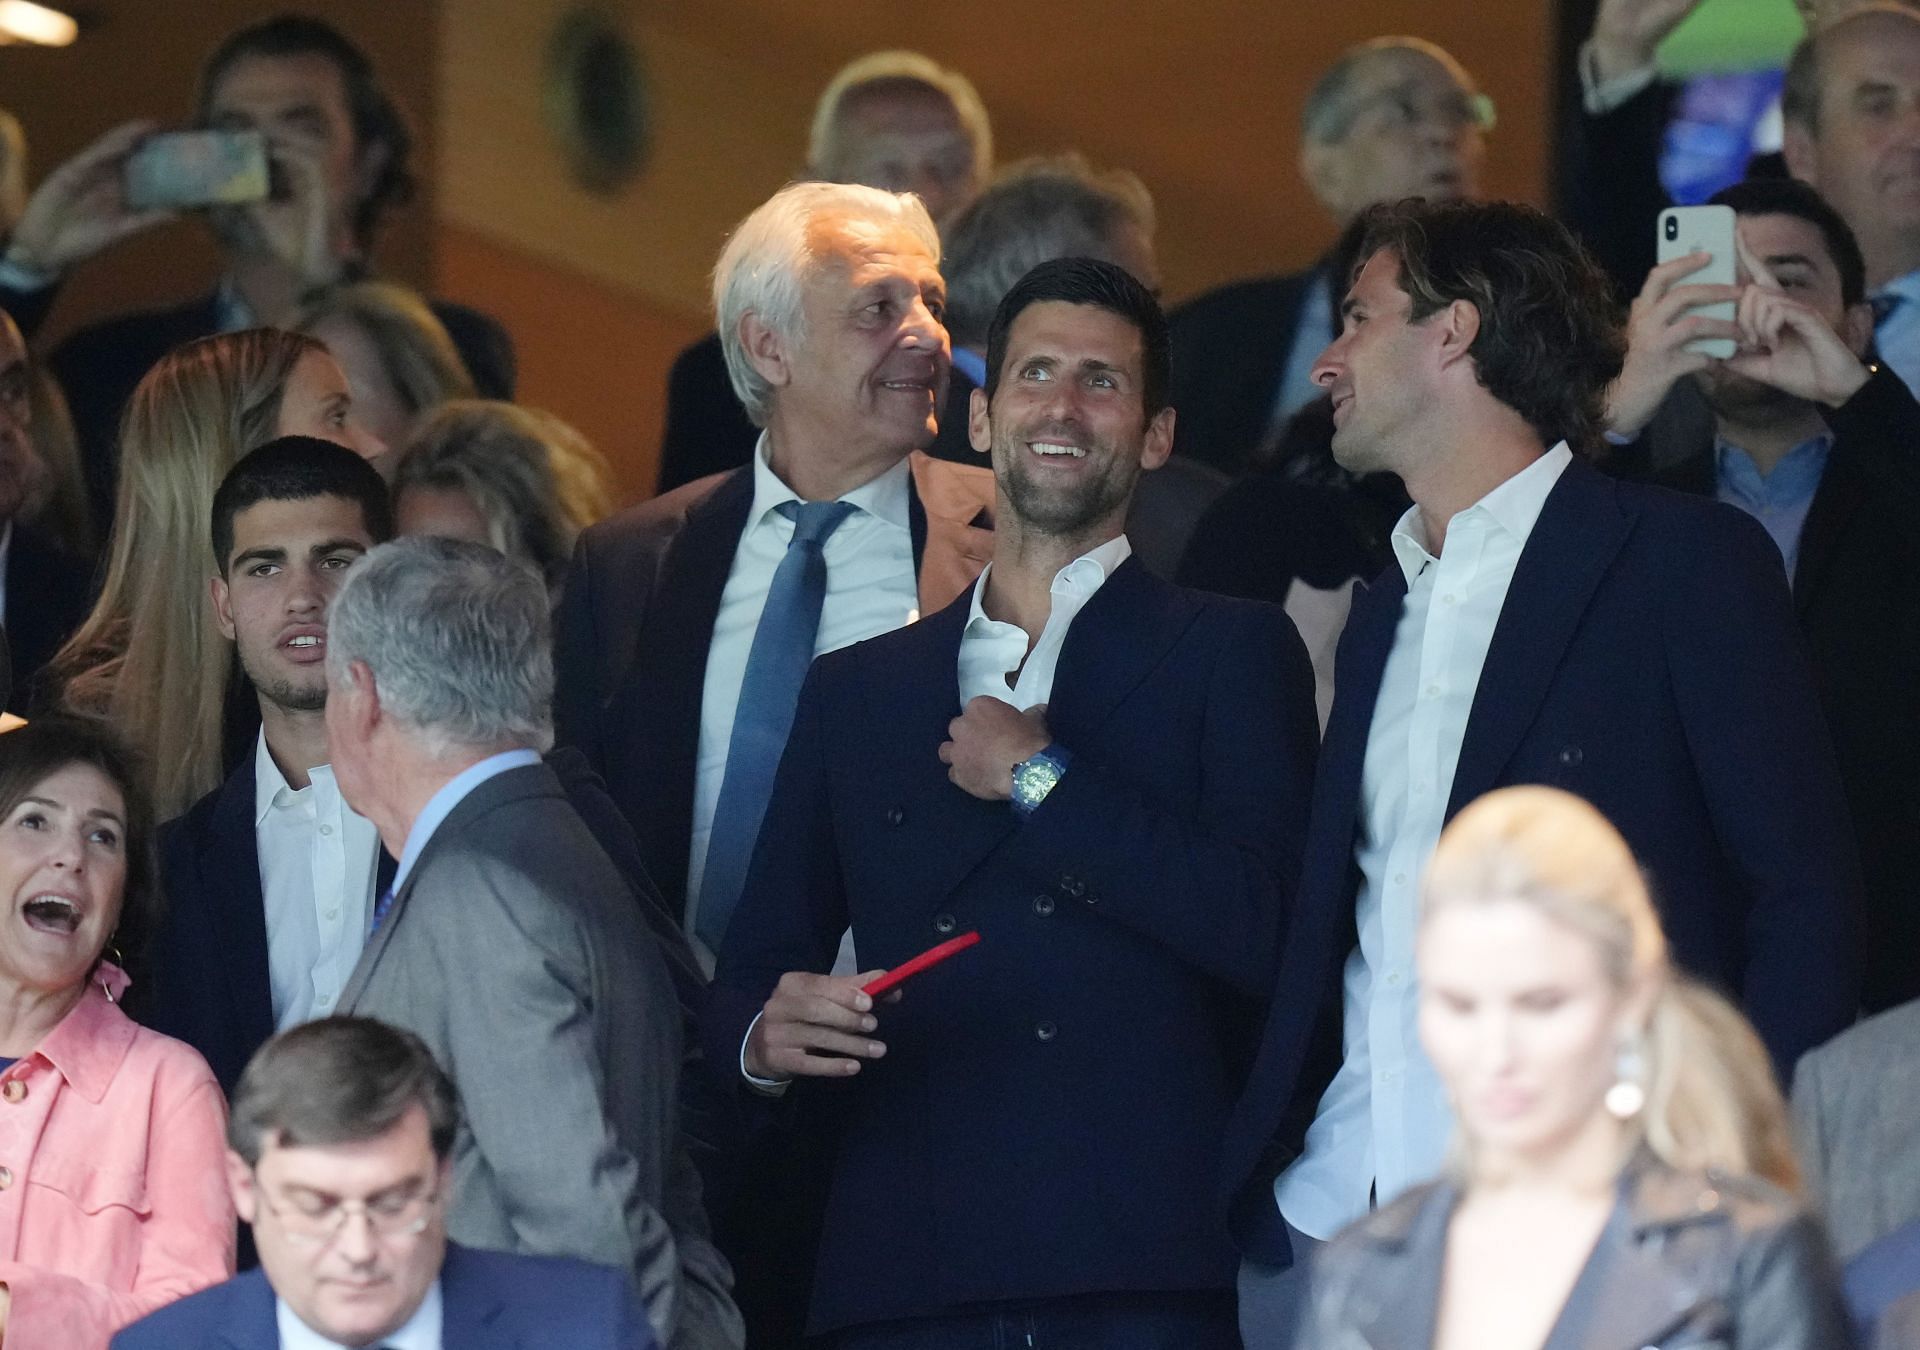 Djokovic at a Champions League semifinal between Real Madrid and Manchester City.